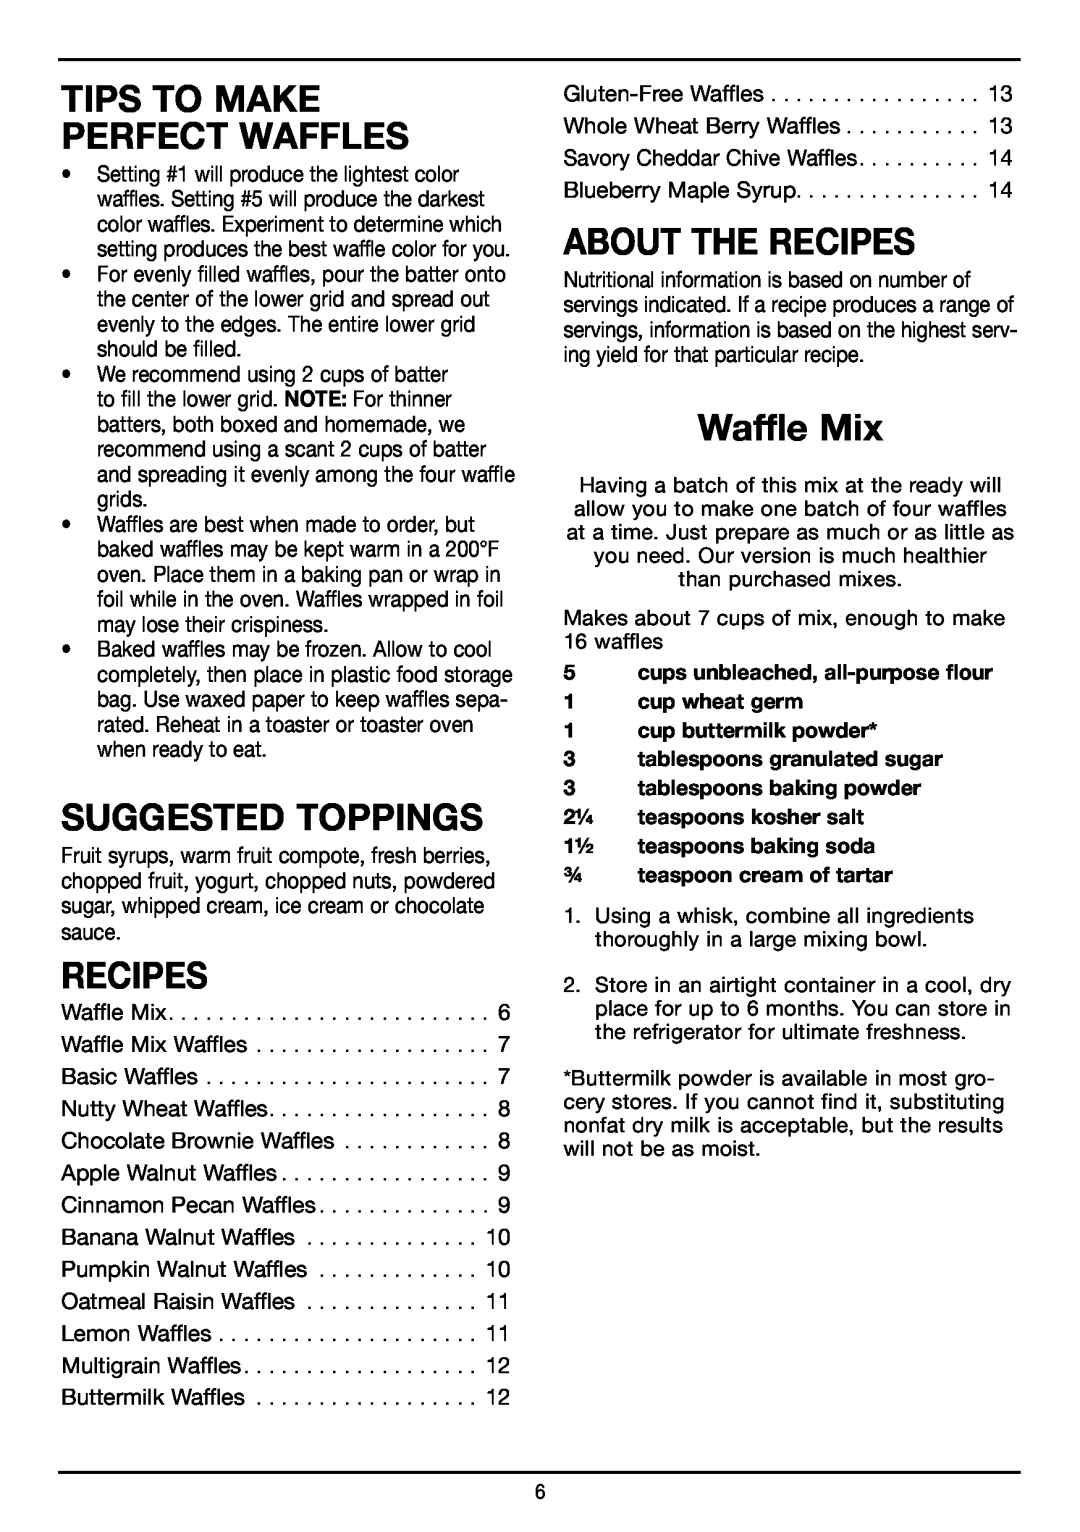 Cuisinart WAF-150 manual Suggested Toppings, About The Recipes, Waffle Mix, Tips To Make Perfect Waffles 